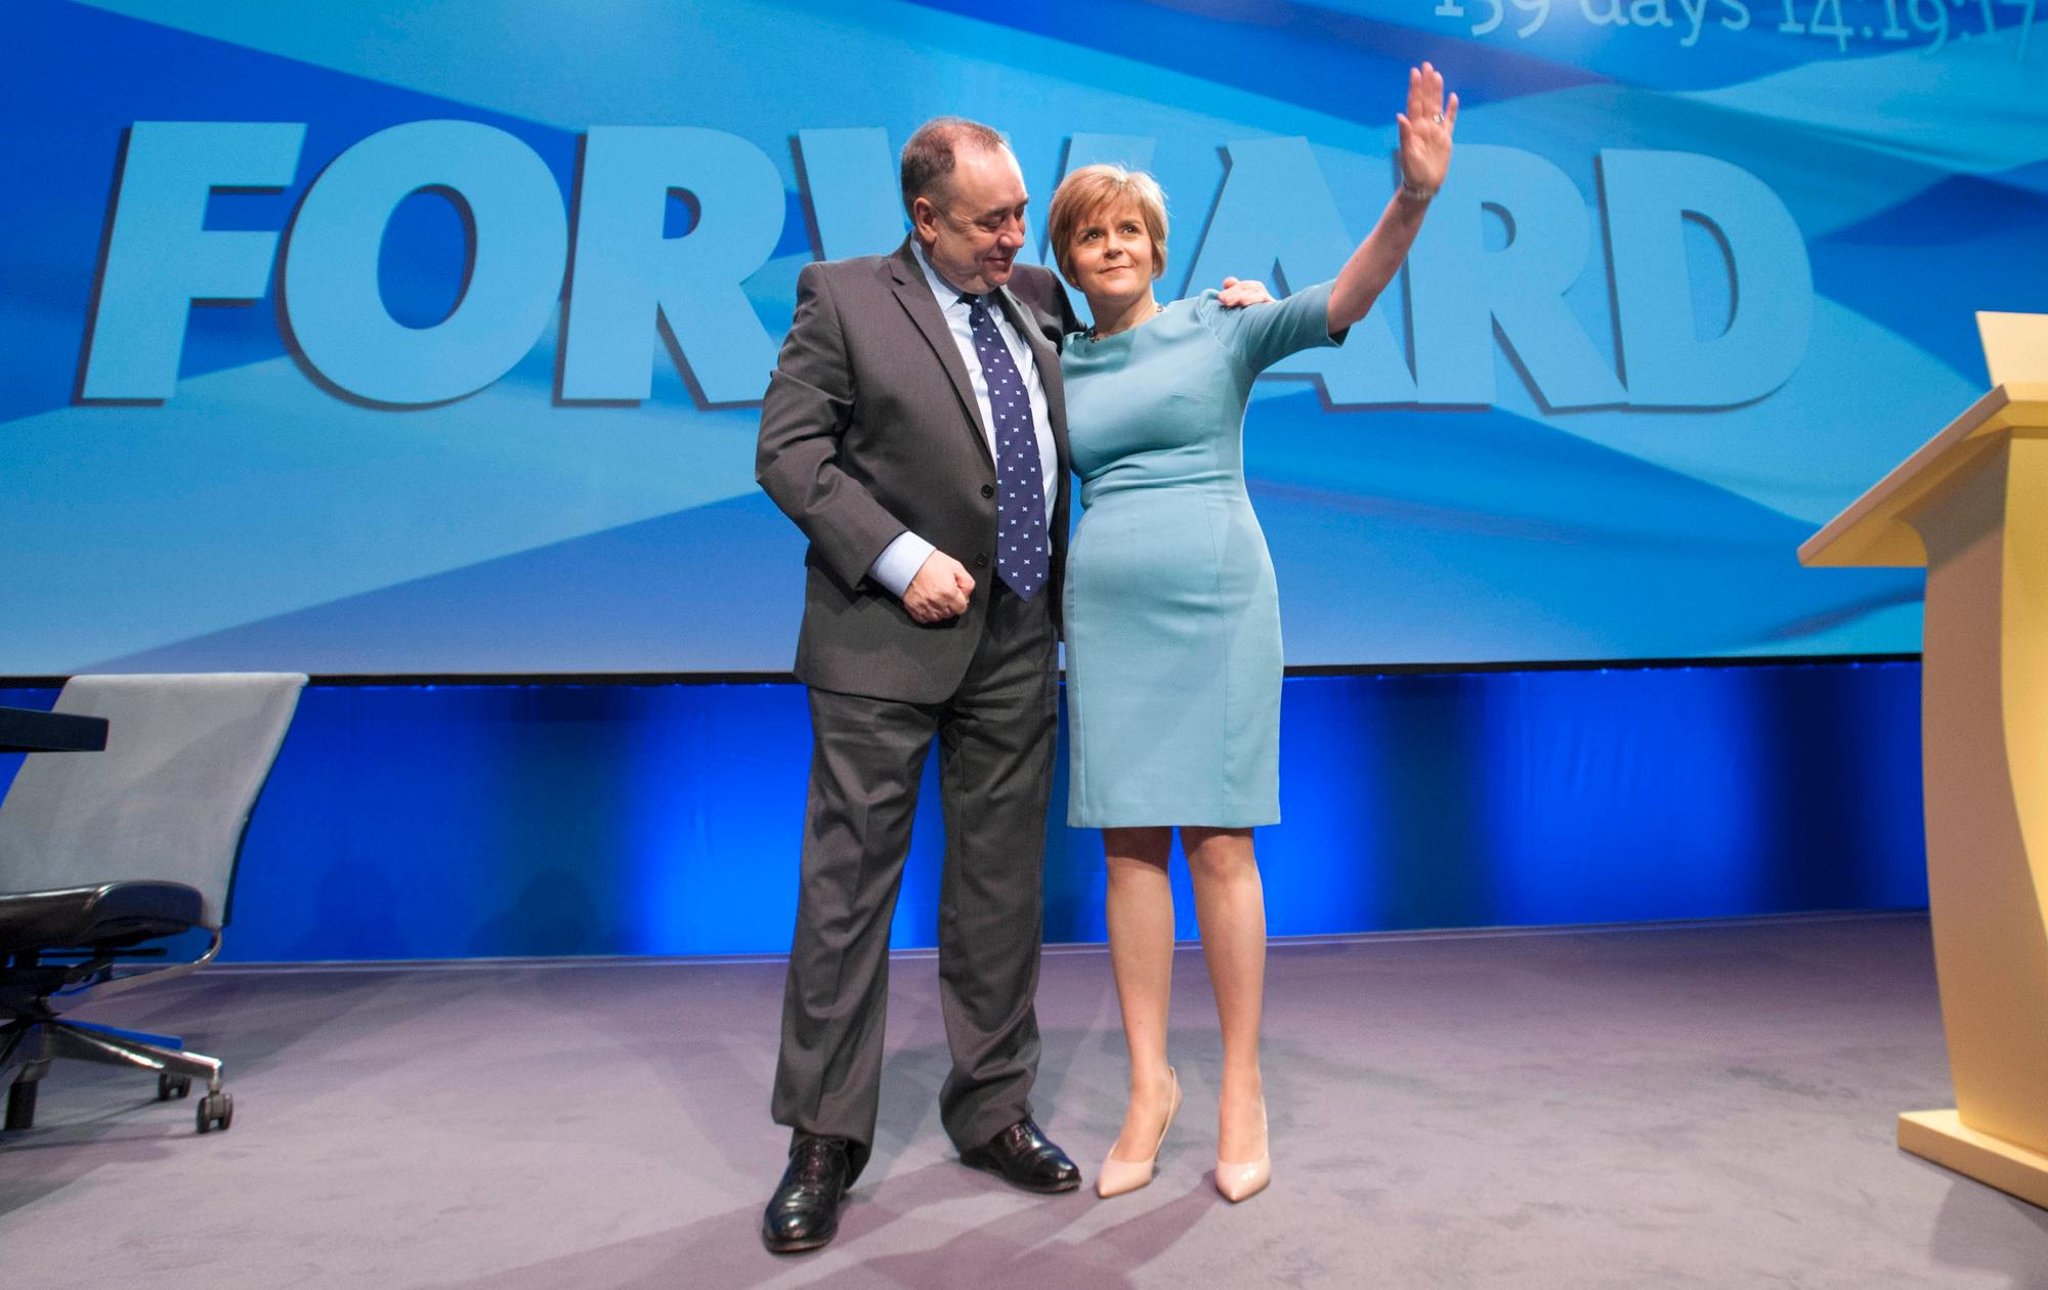 Scottish election 2021: Alex Salmond expresses sadness at relationship collapse and denies saying he could 'destroy' Nicola Sturgeon